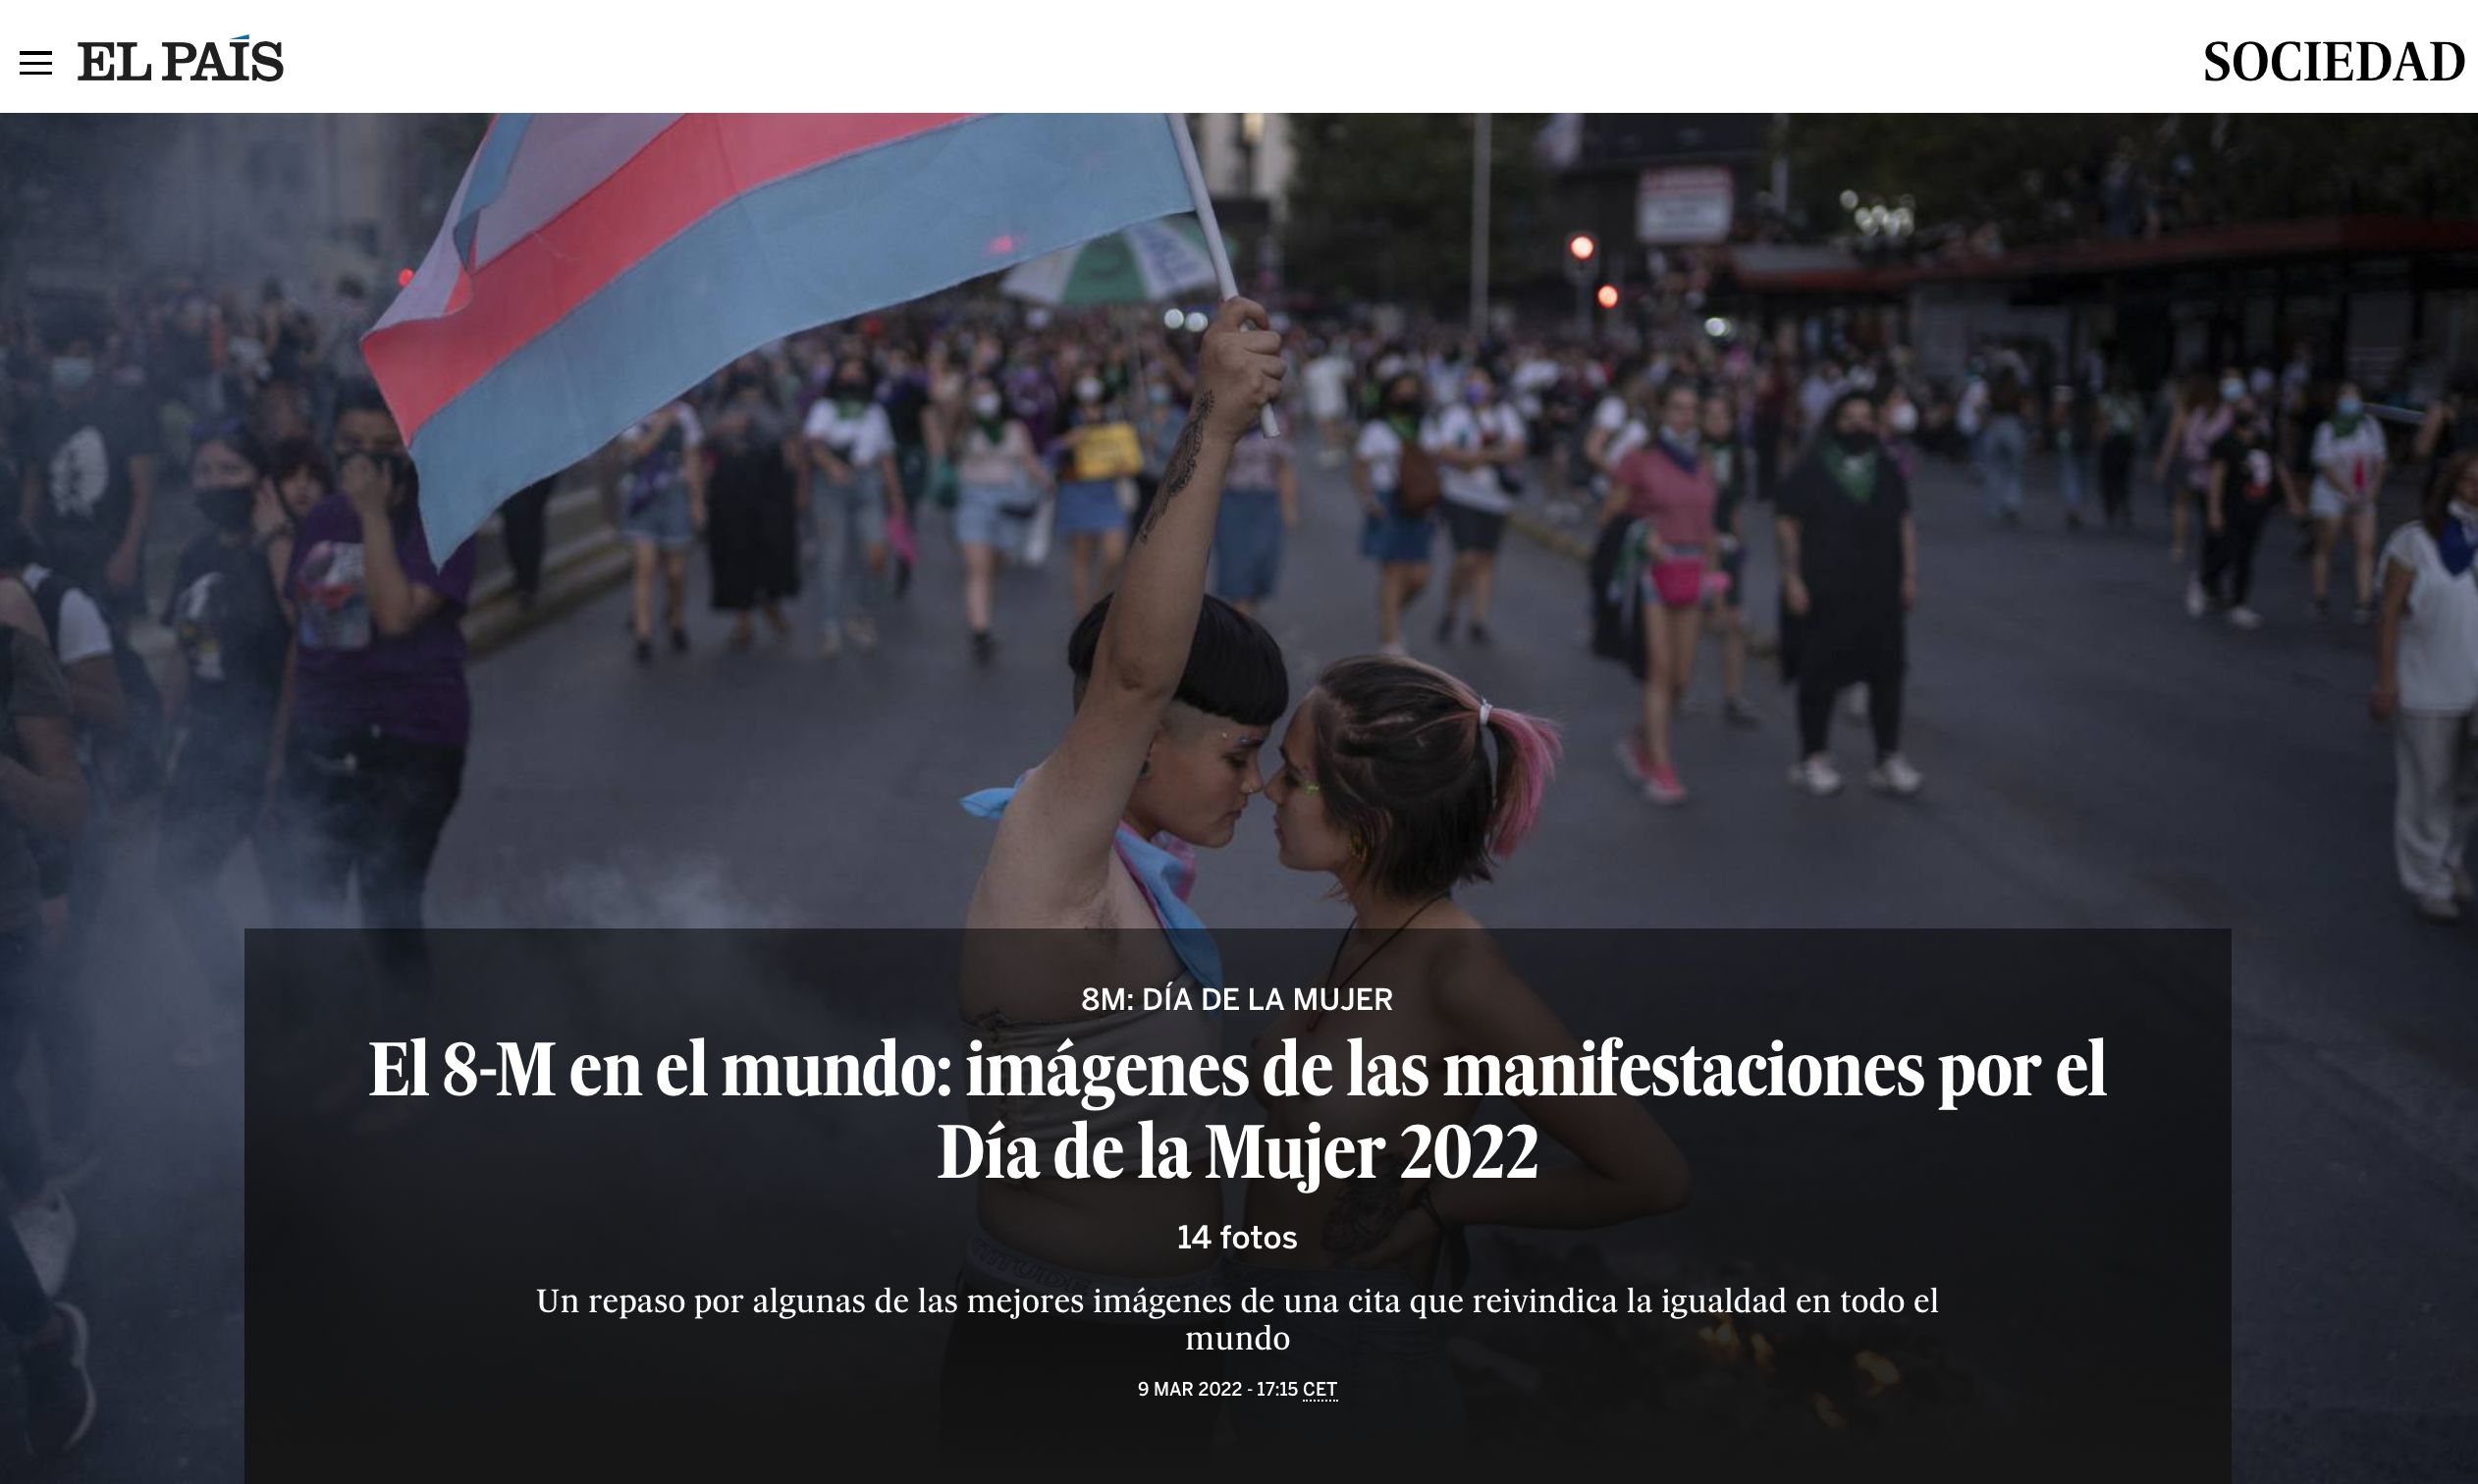 El País: 8-M in the world: images of the demonstrations for International Women's Day 2022